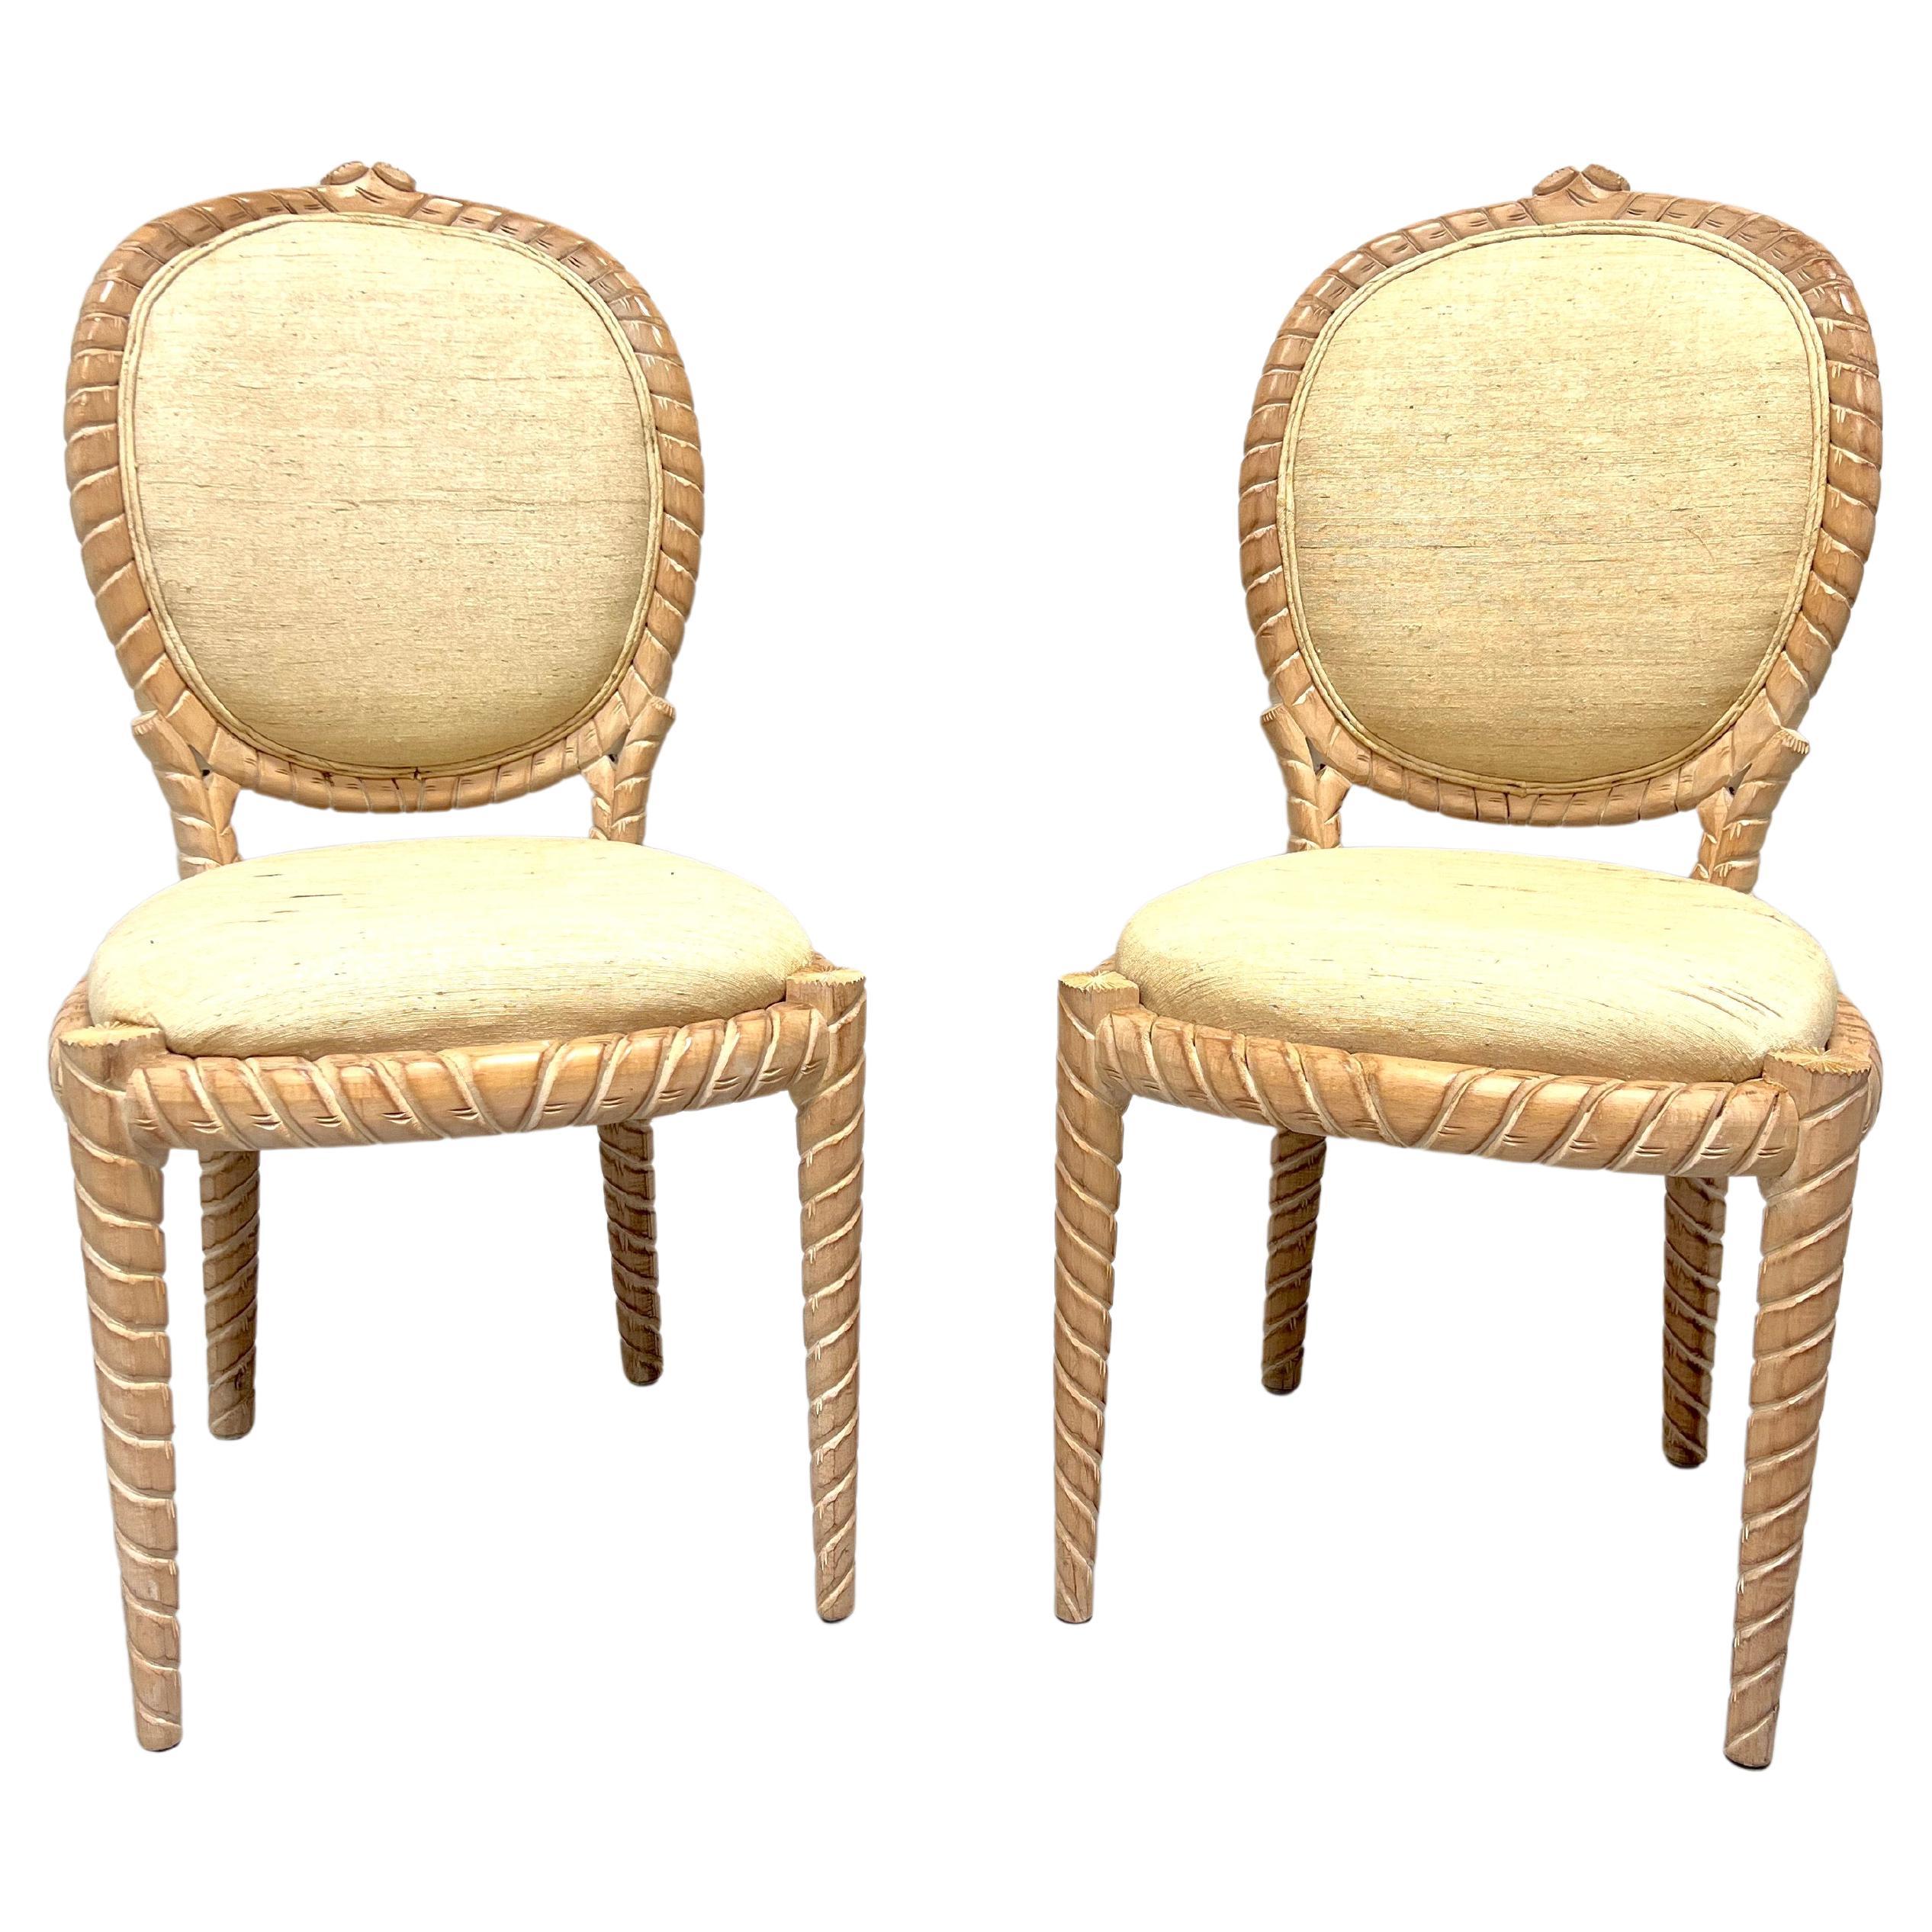 1980's Carved Whitewashed Wood Boho Rope Twist Dining Side Chairs - Pair A For Sale